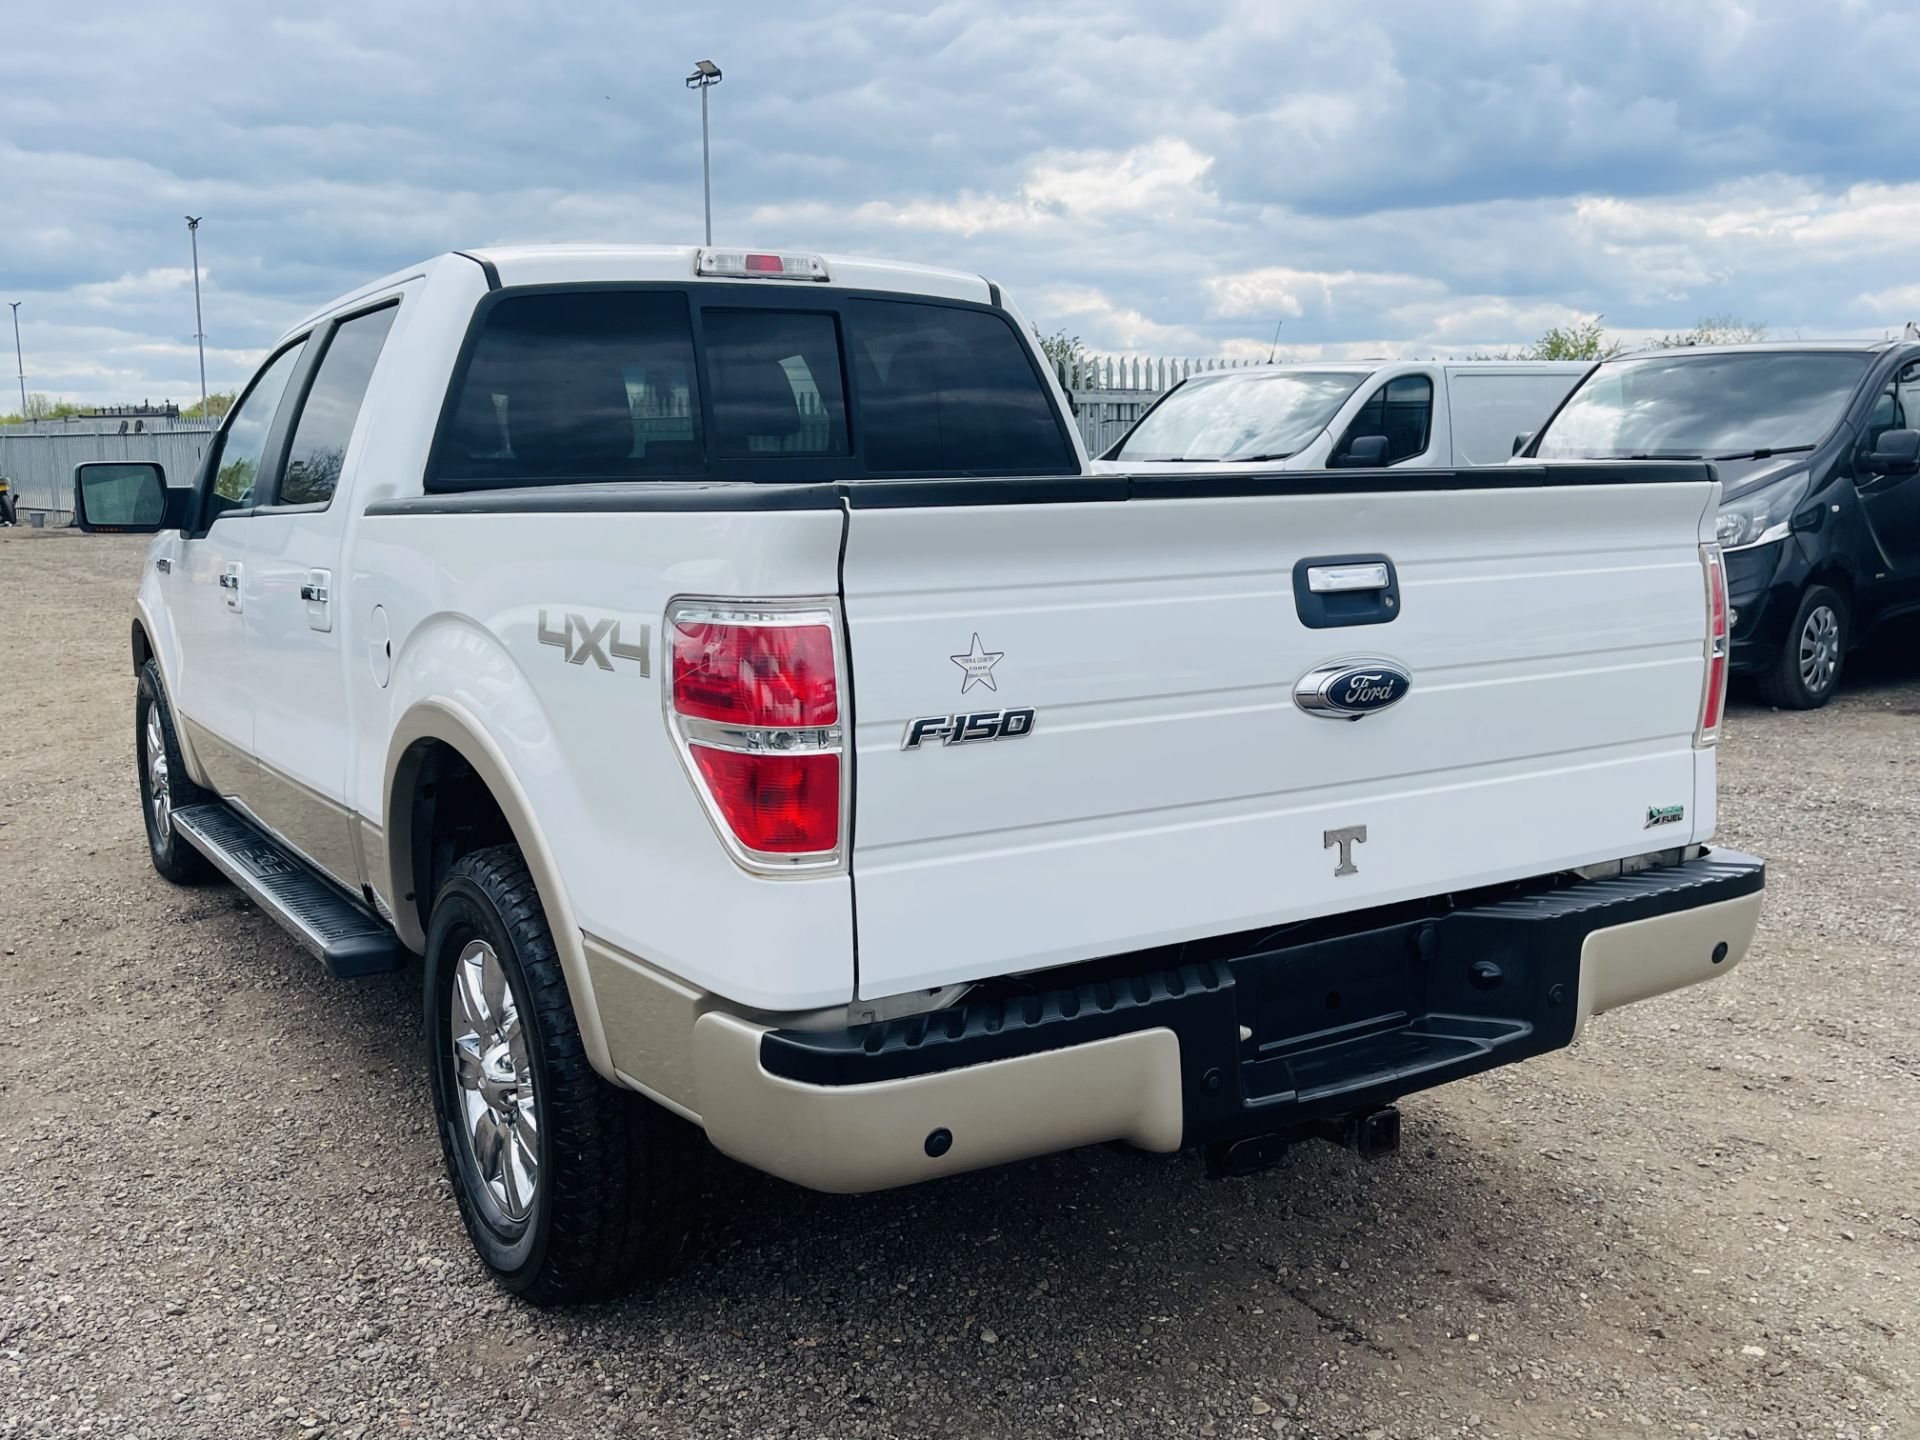 ** ON SALE ** Ford F-150 5.4L V8 Lariat Supercrew 4WD ' 2010 Year' A/C - Full Spec - ULEZ Compliant - Image 8 of 29